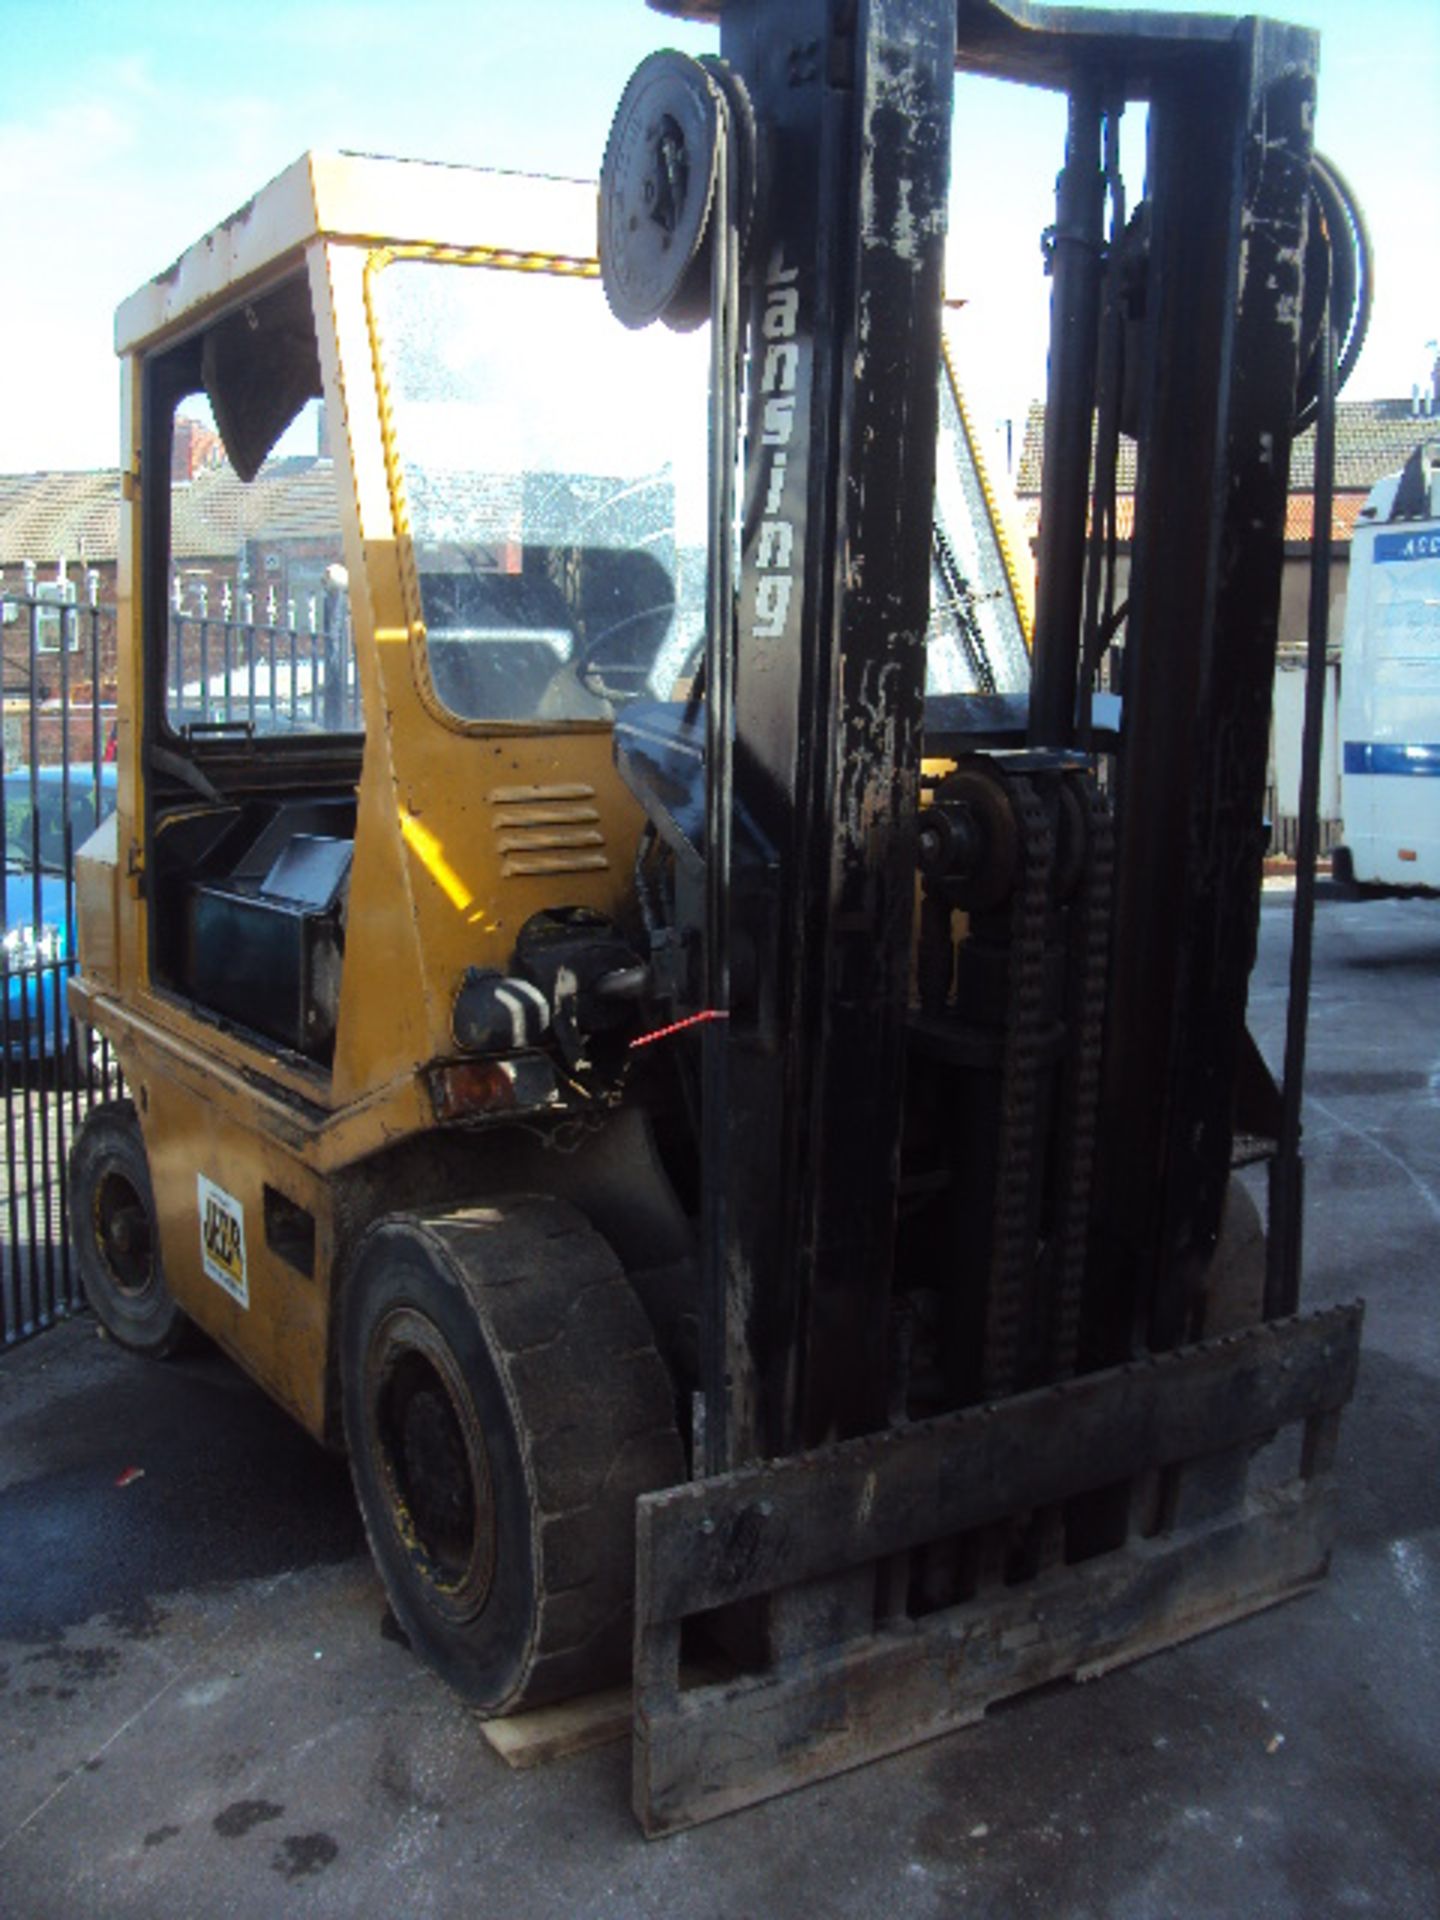 LANSING 7.40 4t diesel driven forklift truck with duplex free-lift mast (sold as not working) - Image 3 of 4